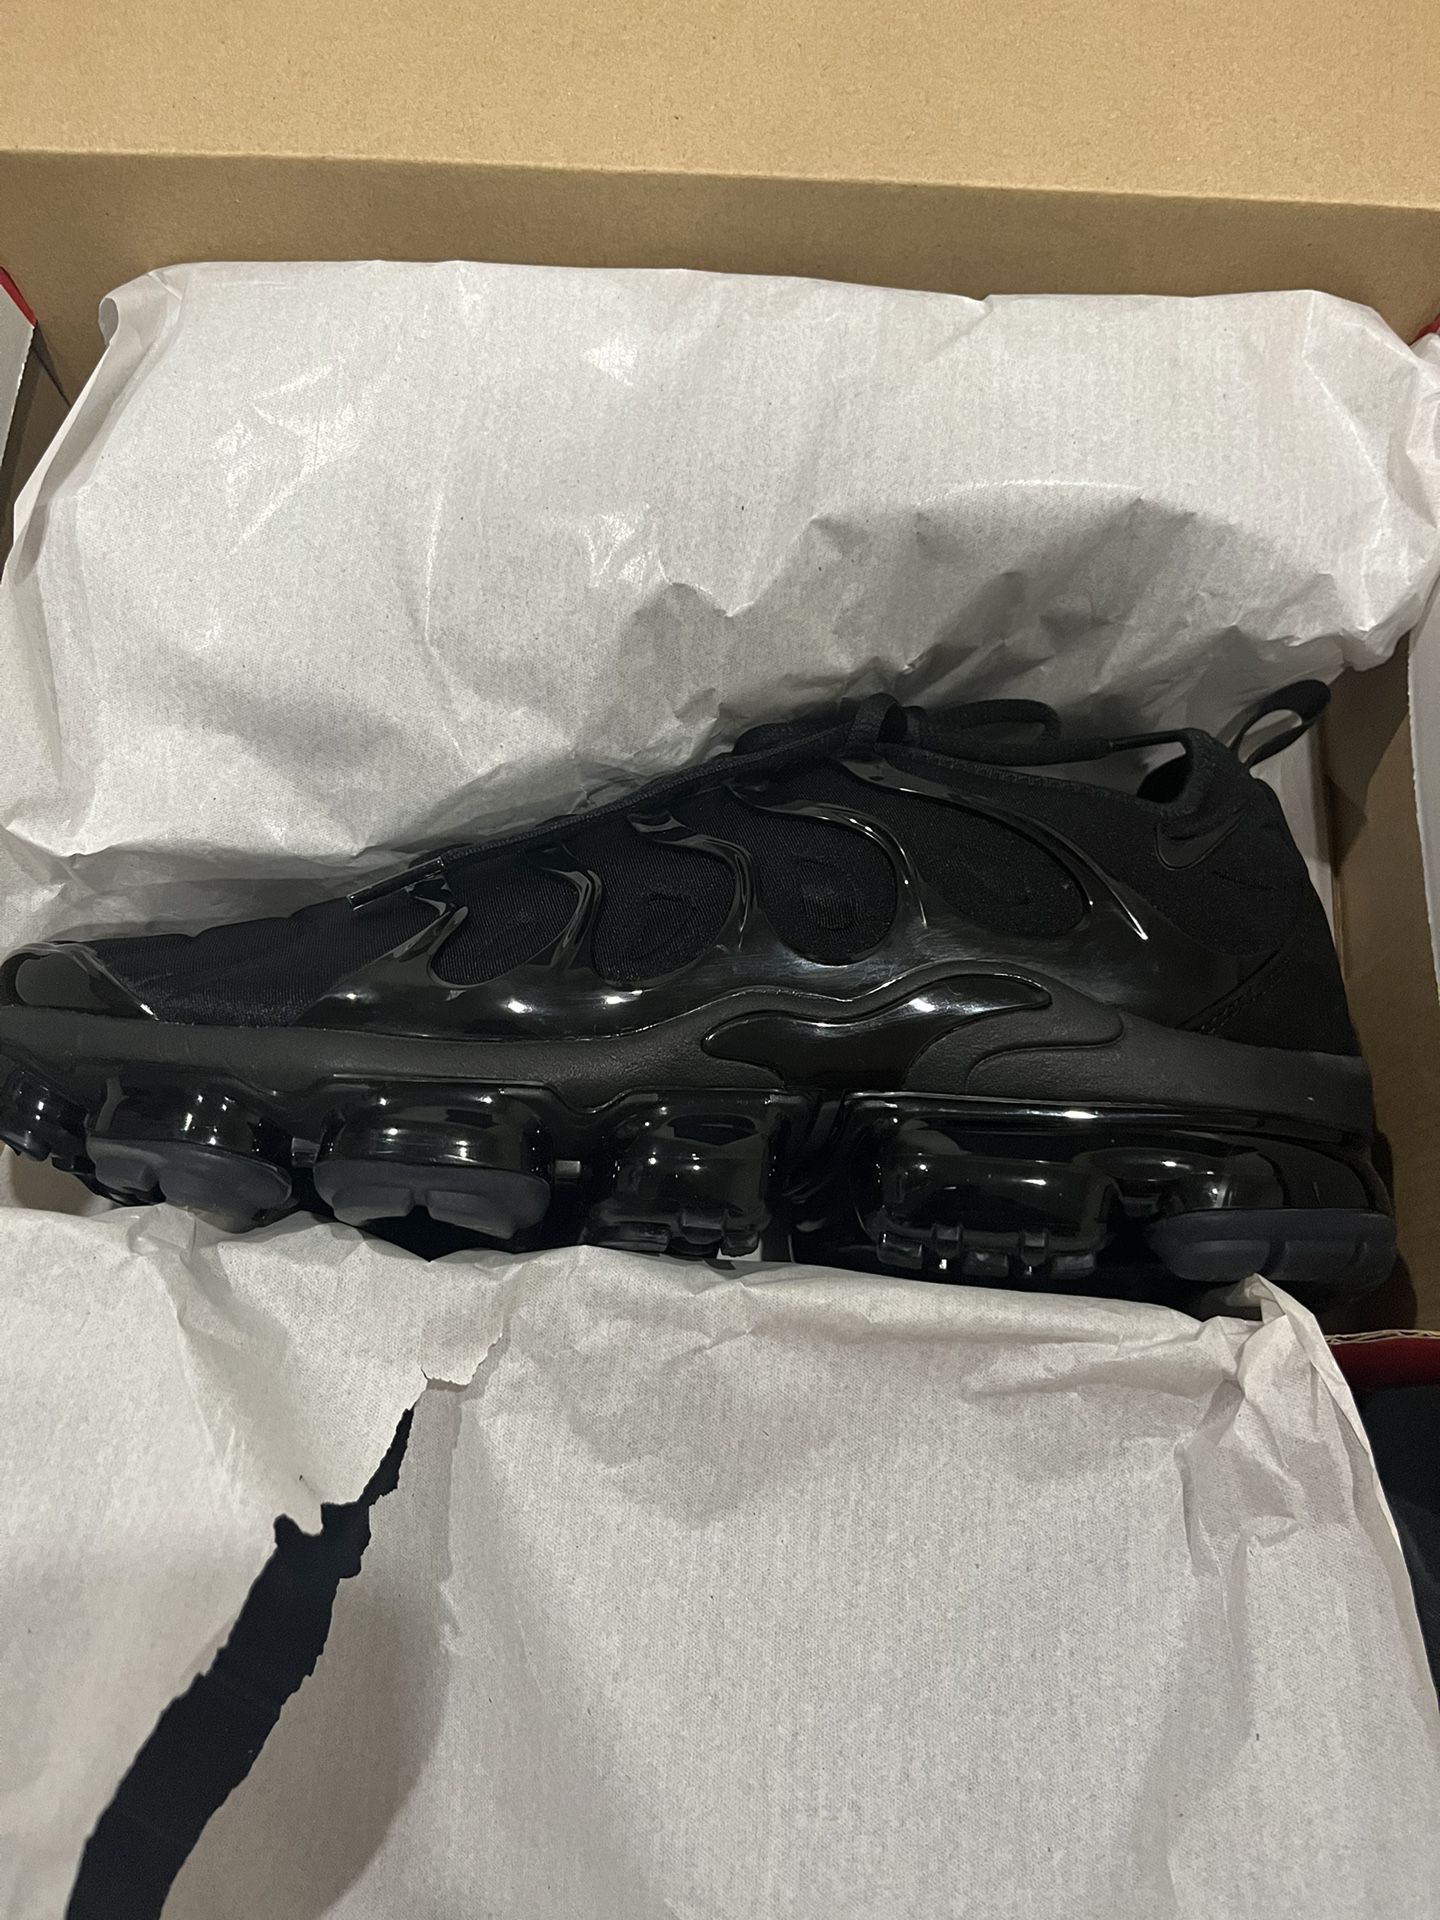 vapor max size 11 for Sale in Alburtis, PA - OfferUp